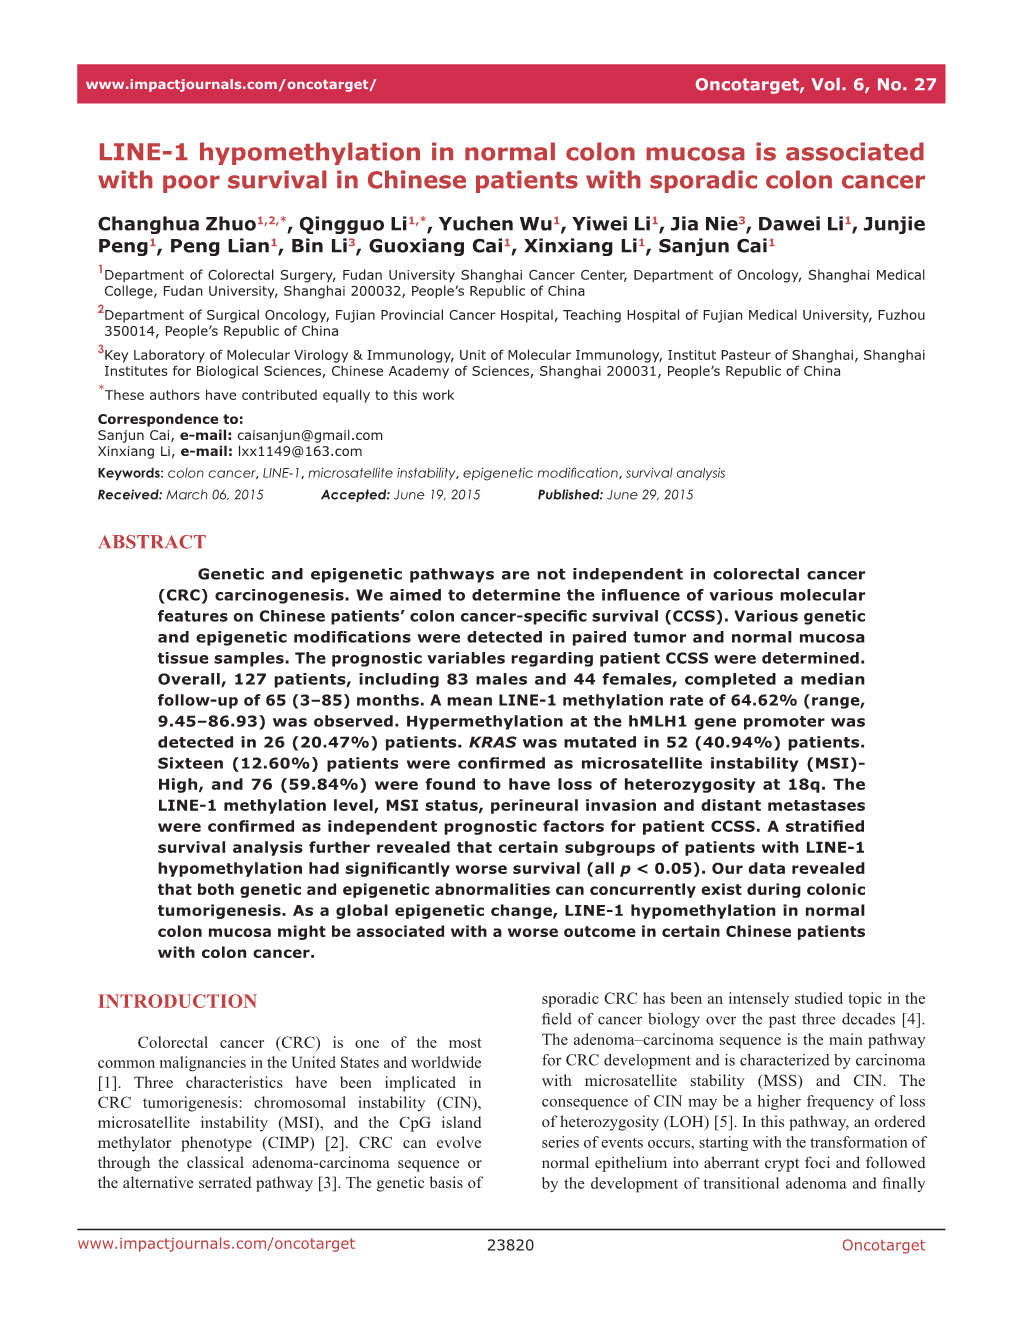 LINE-1 Hypomethylation in Normal Colon Mucosa Is Associated with Poor Survival in Chinese Patients with Sporadic Colon Cancer